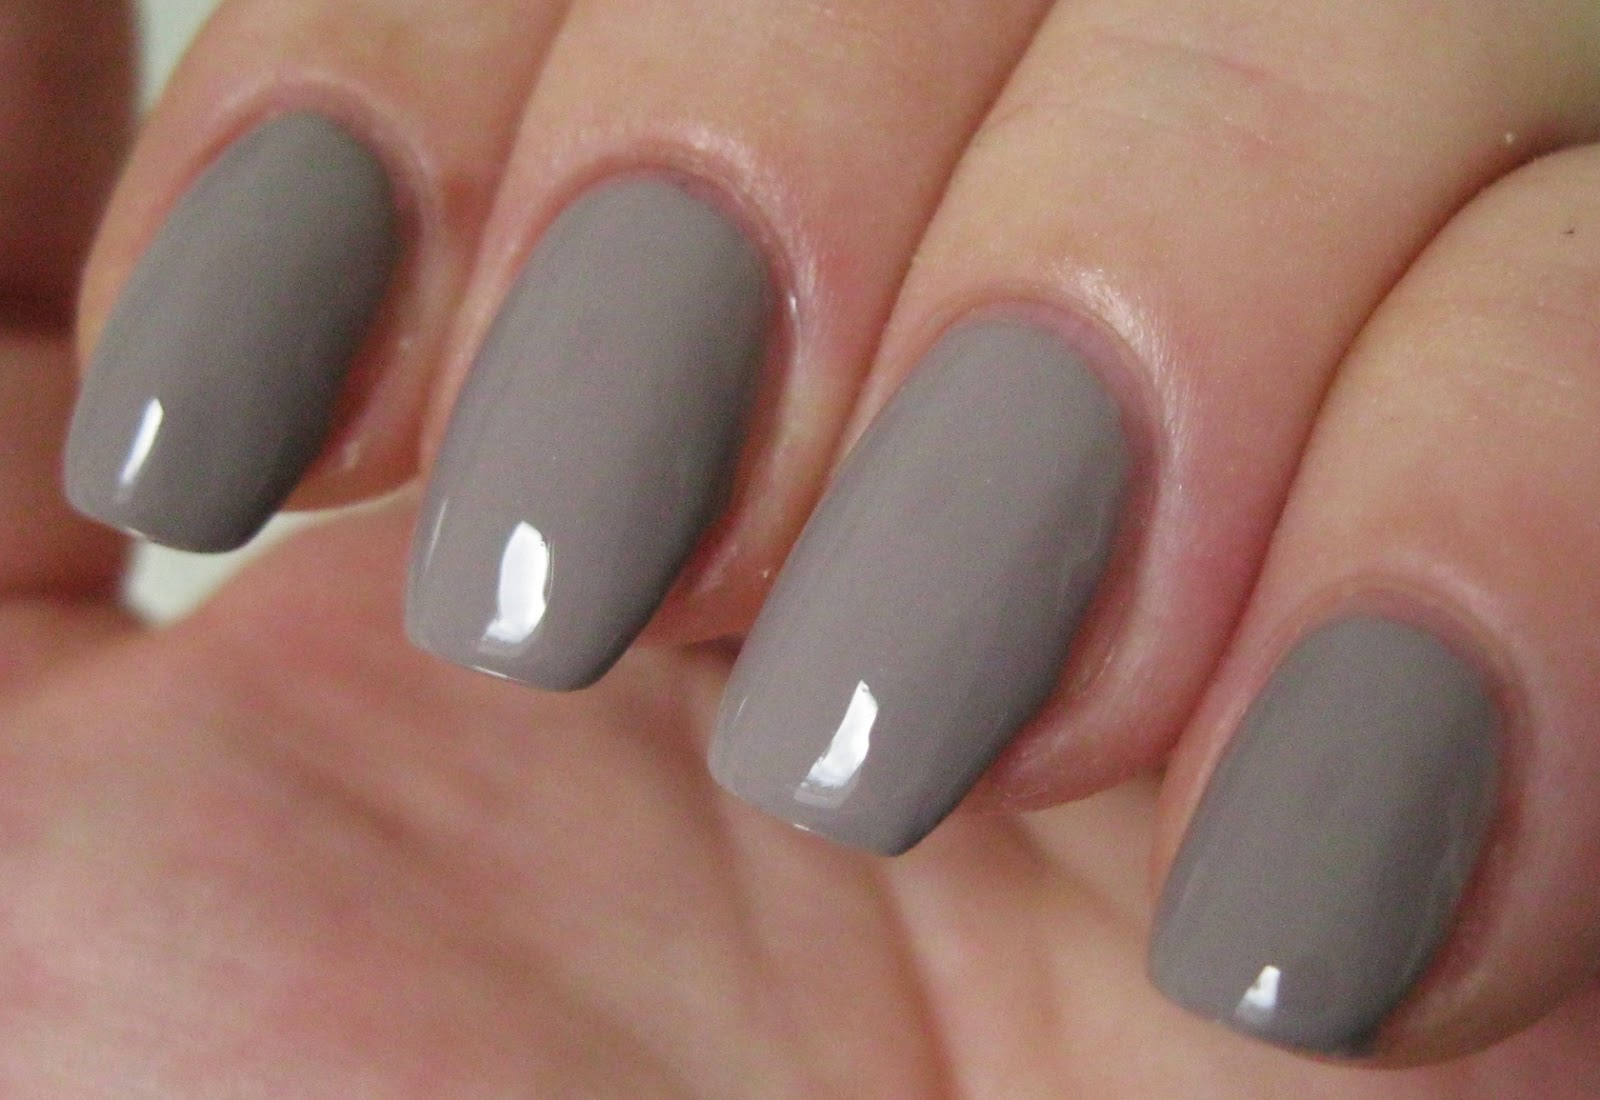 7. OPI Nail Lacquer in "Taupe-less Beach" - wide 2